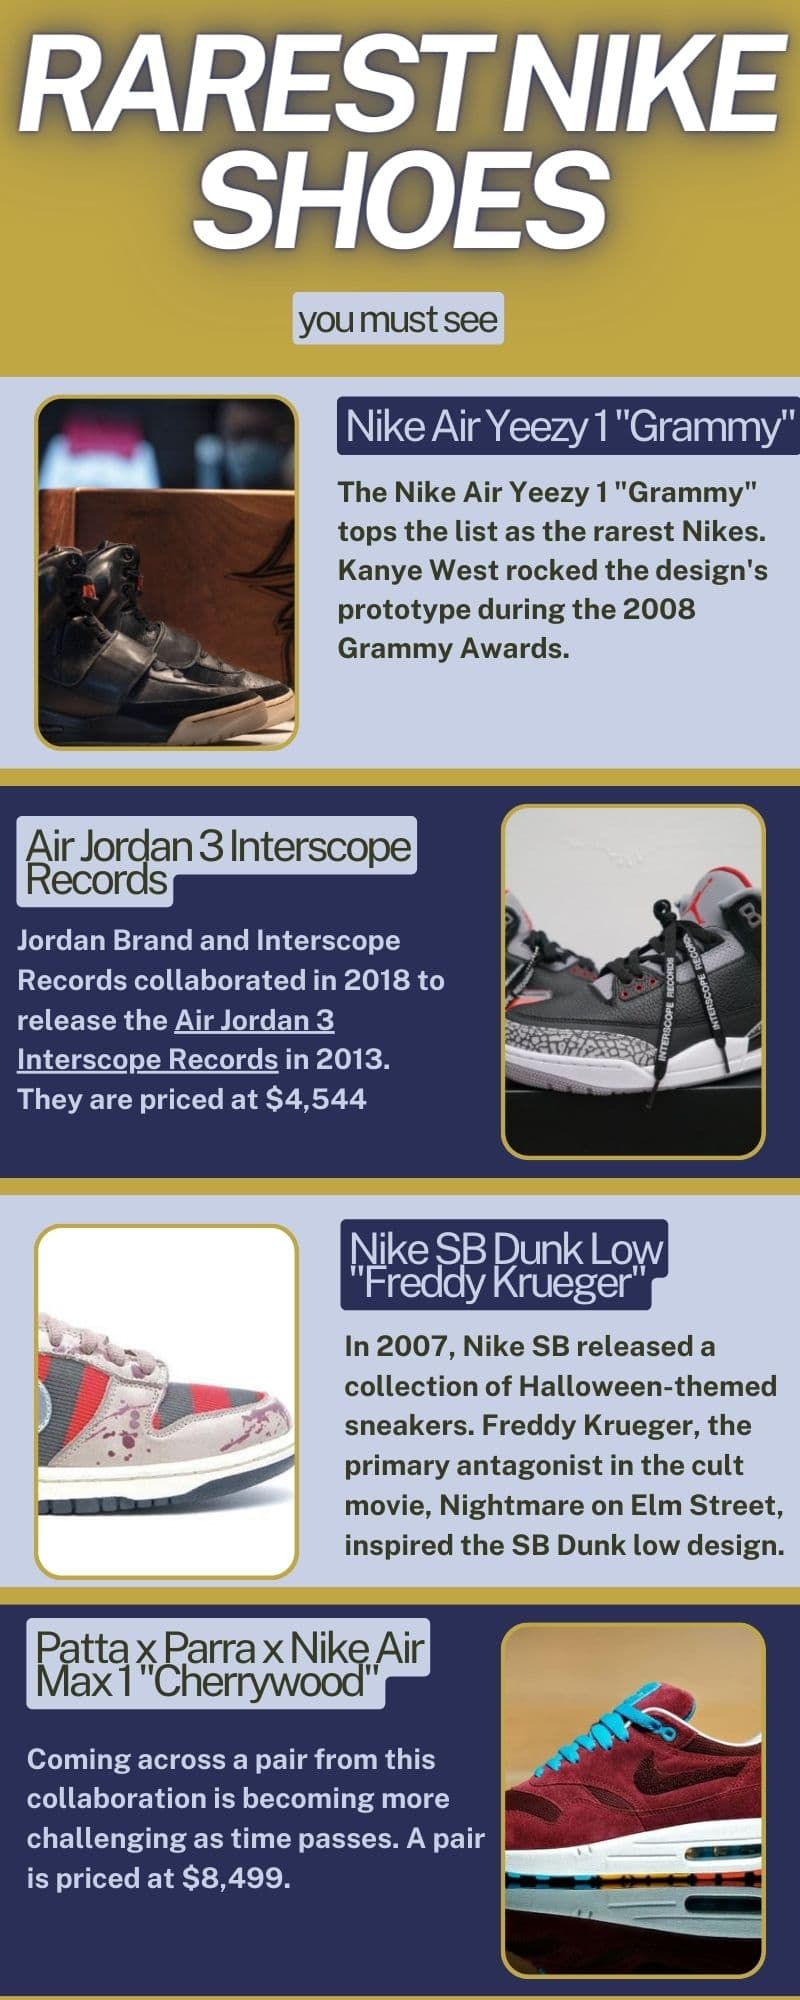 Top 10 rarest Nike shoes you must see